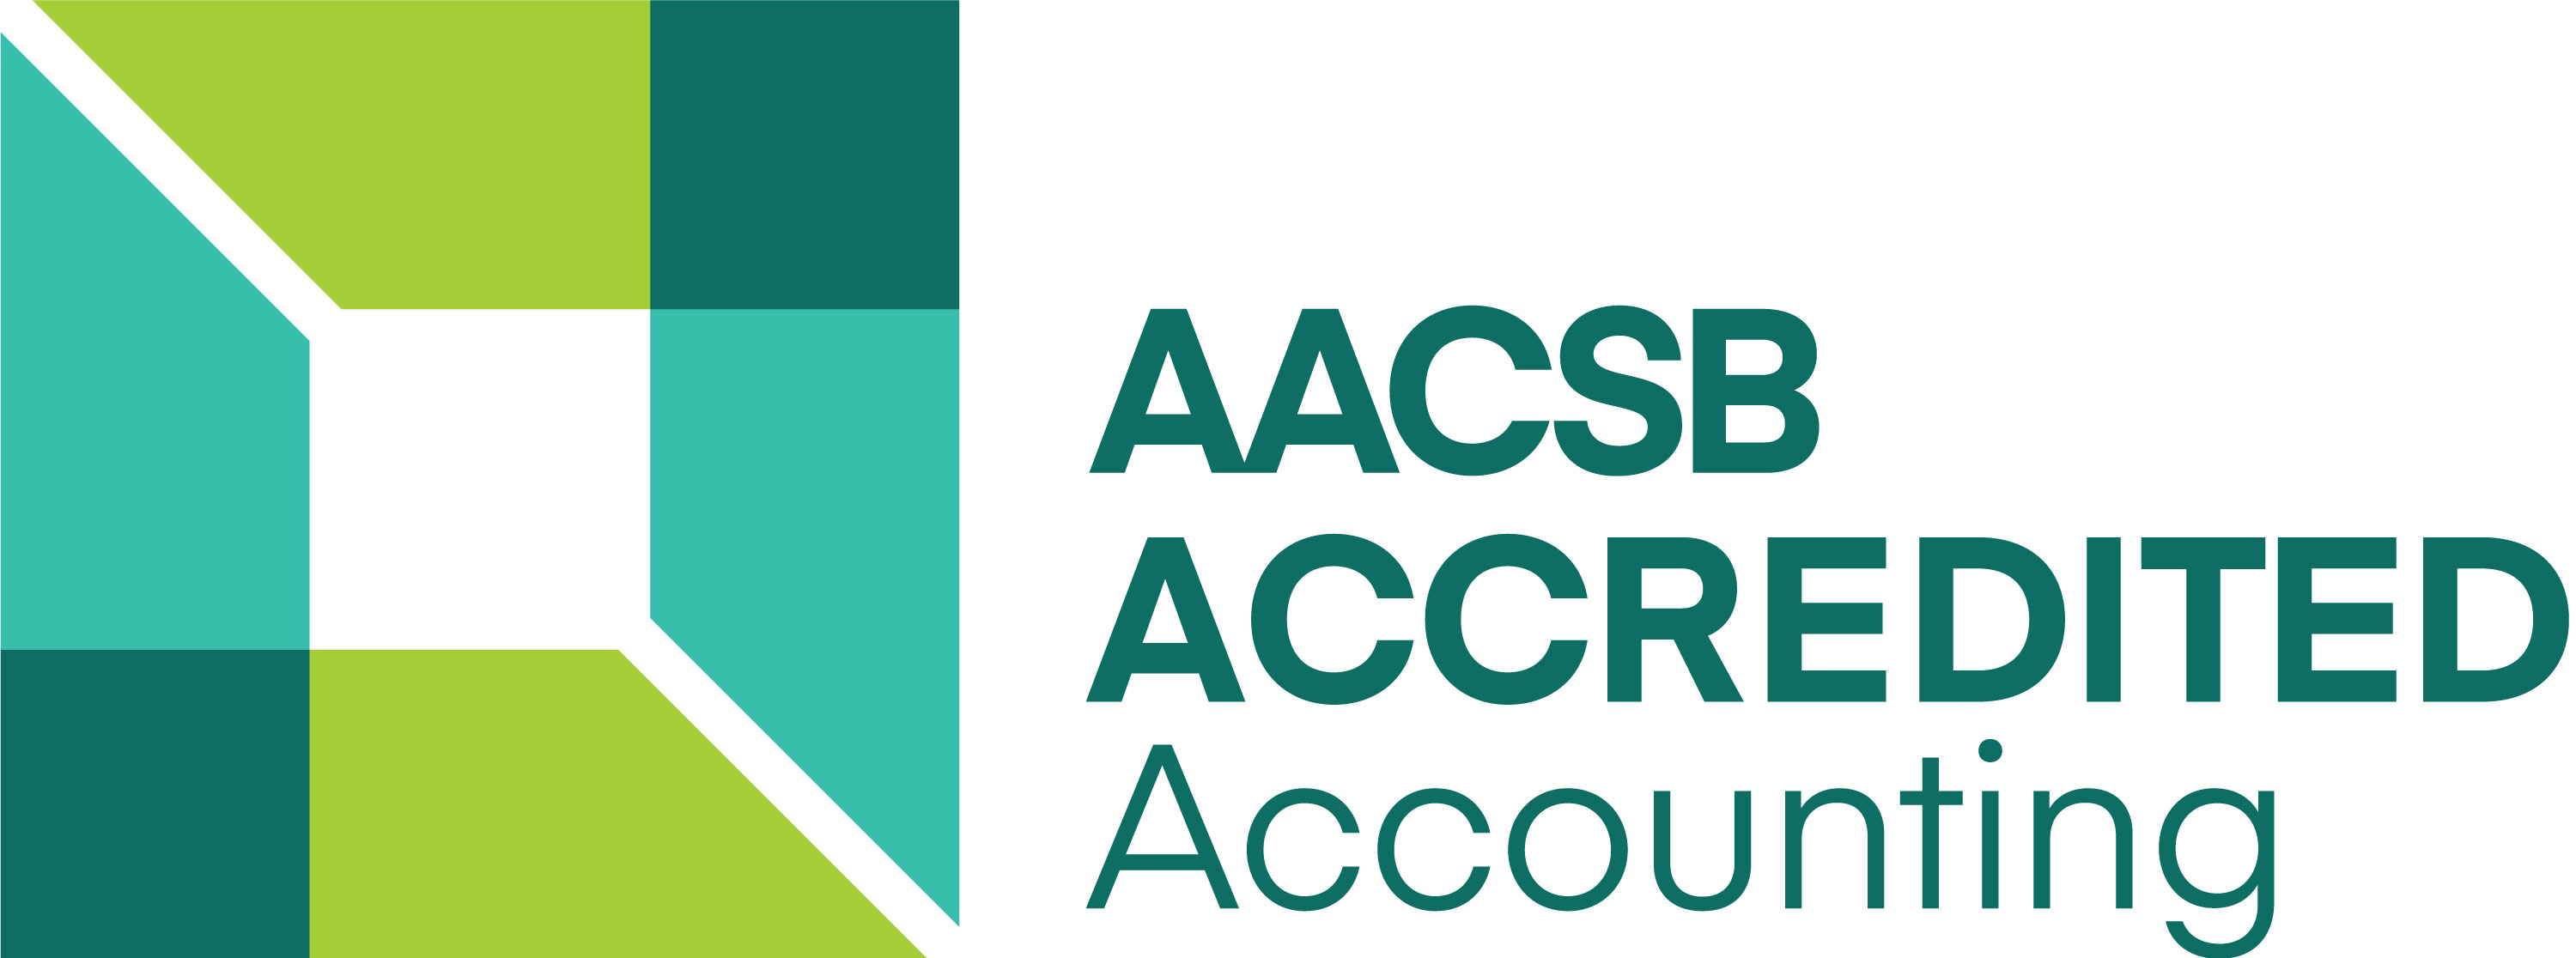 AACSB Accredited Accounting Logo